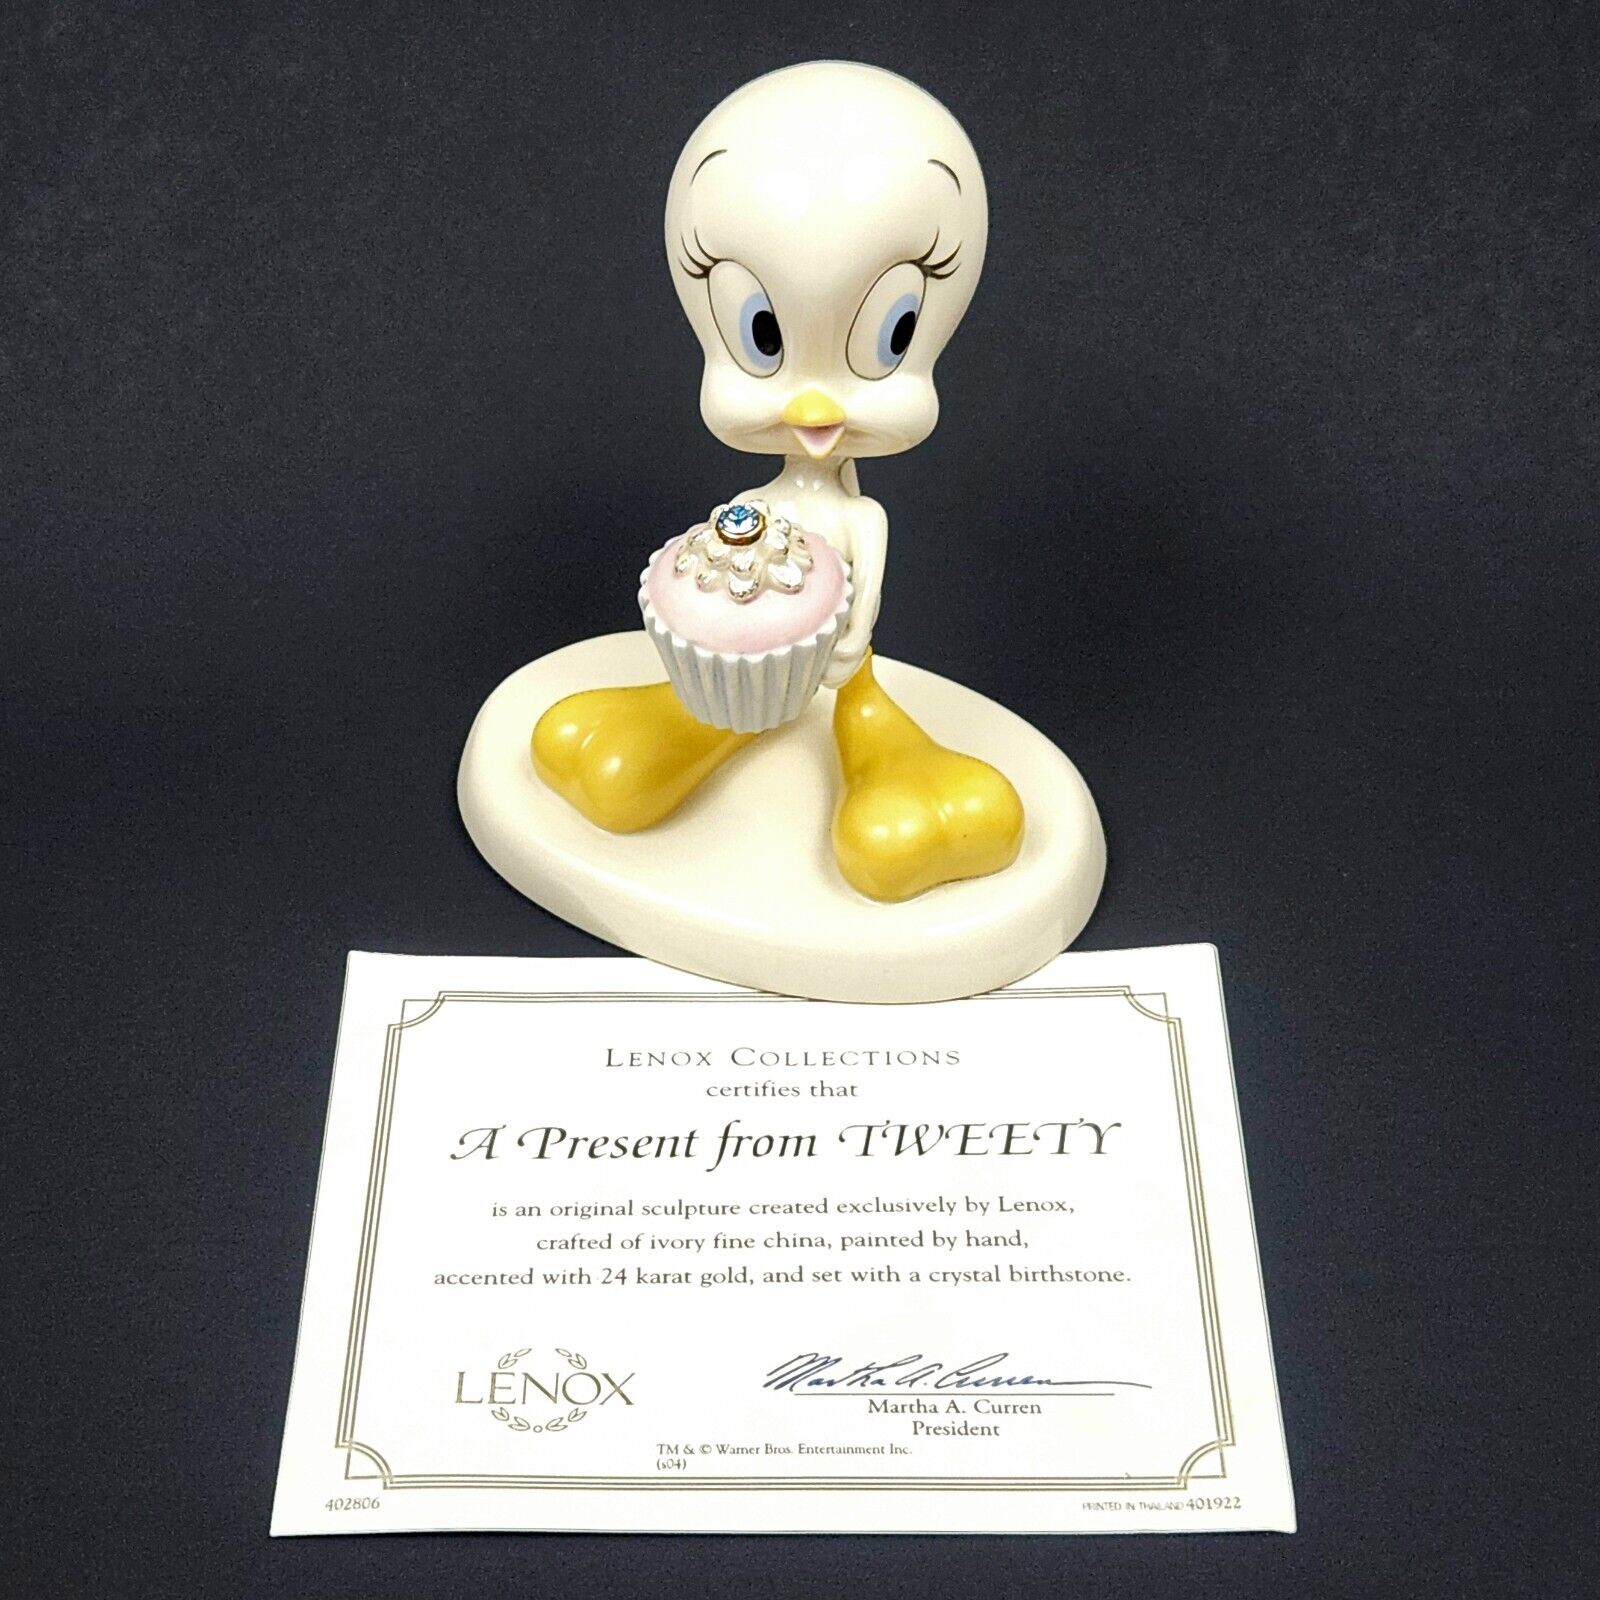 Vintage Lenox A Present From Tweety Porcelain Figurine Looney Tunes No Box